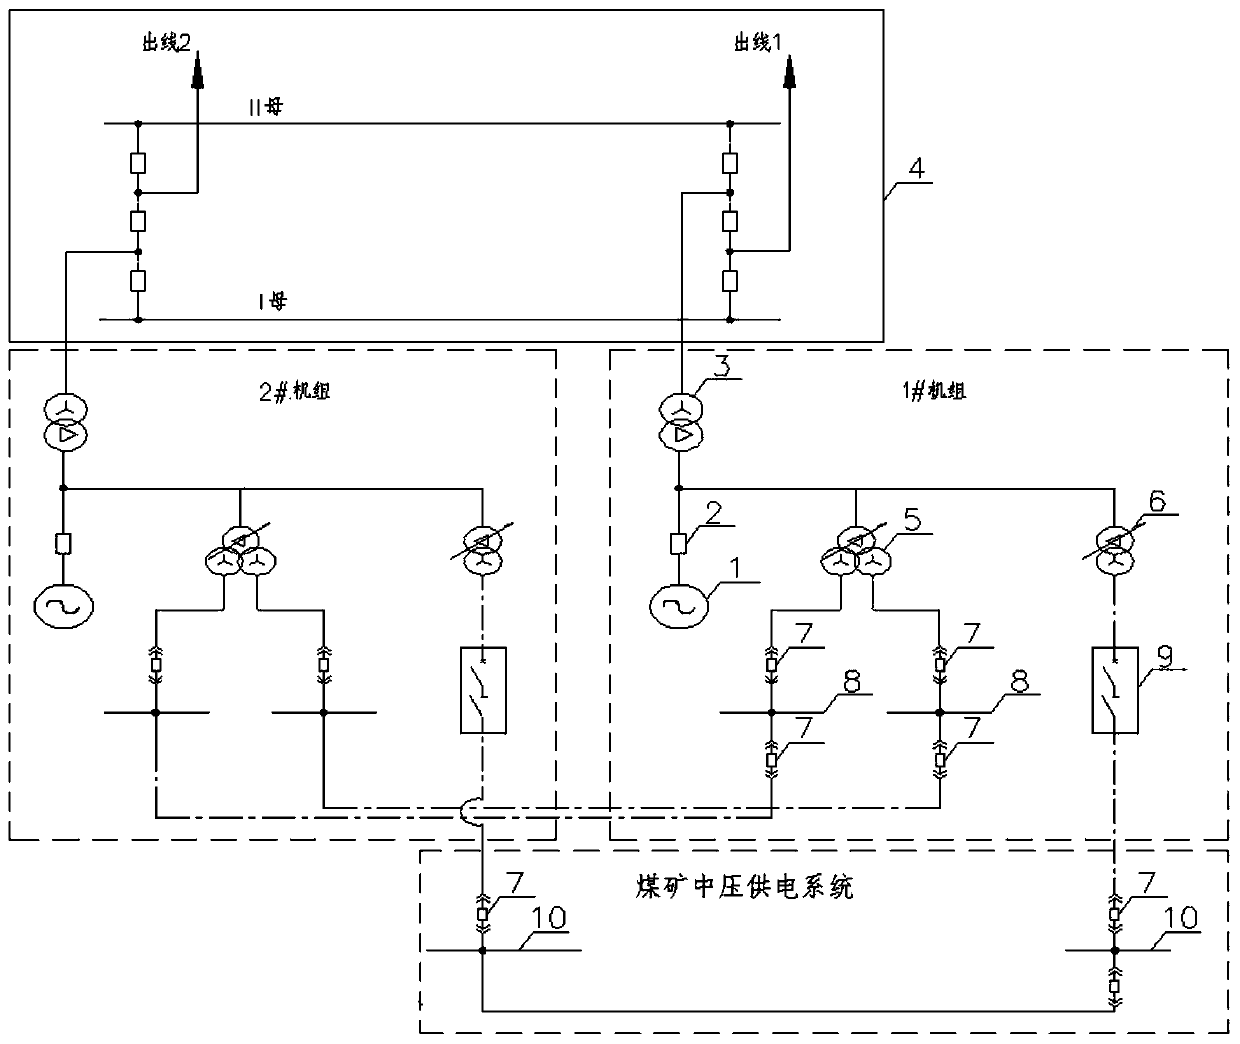 Internal comprehensive power supply system of large-scale coal-electricity integrated power station